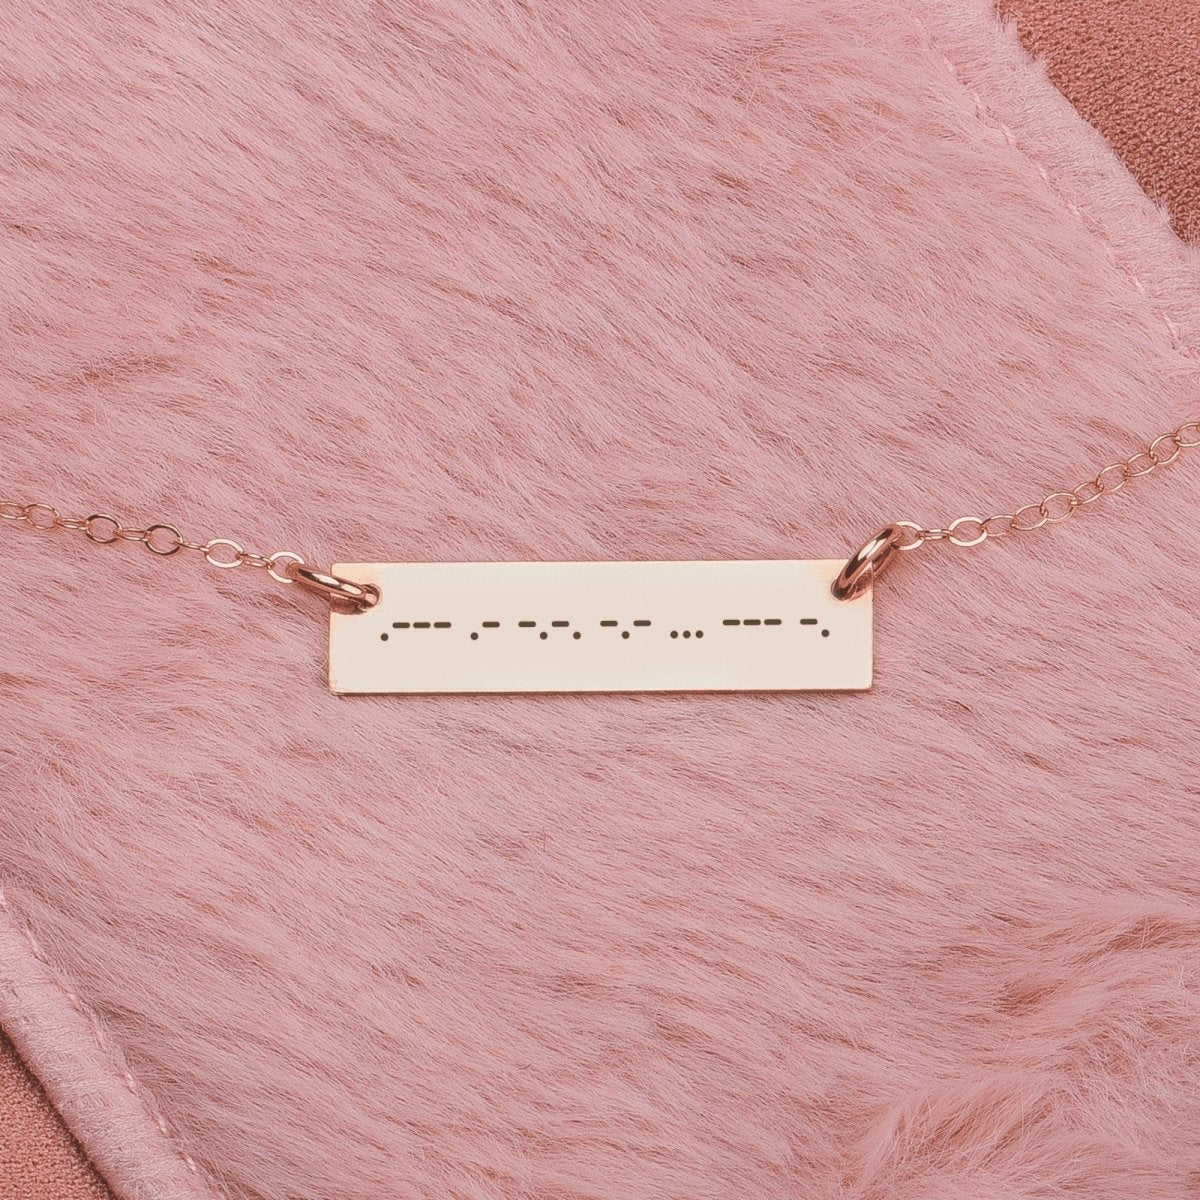 Personalized Morse Code Bar Necklace - Melanie Golden Jewelry - bar necklaces, Engraved Jewelry, love, motherhood, necklace, personalized, personalized necklace, VALENTINES